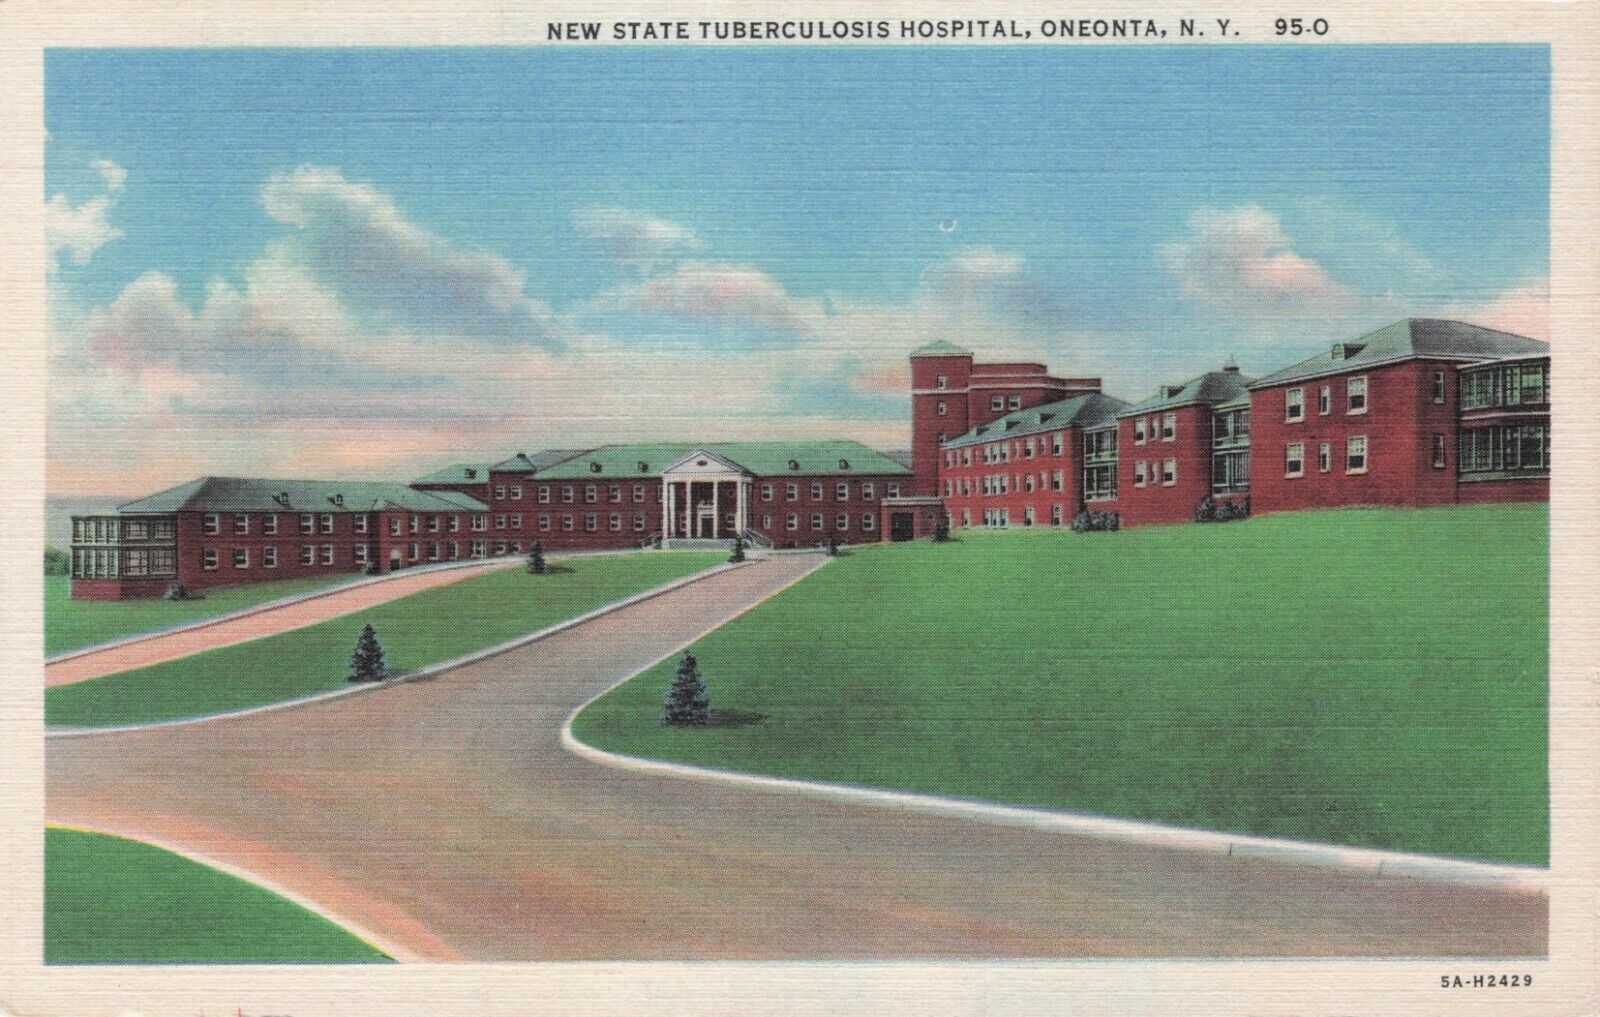 Vintage Postcard Oneonta New York New State Tuberculosis Hospital ca 1935  510